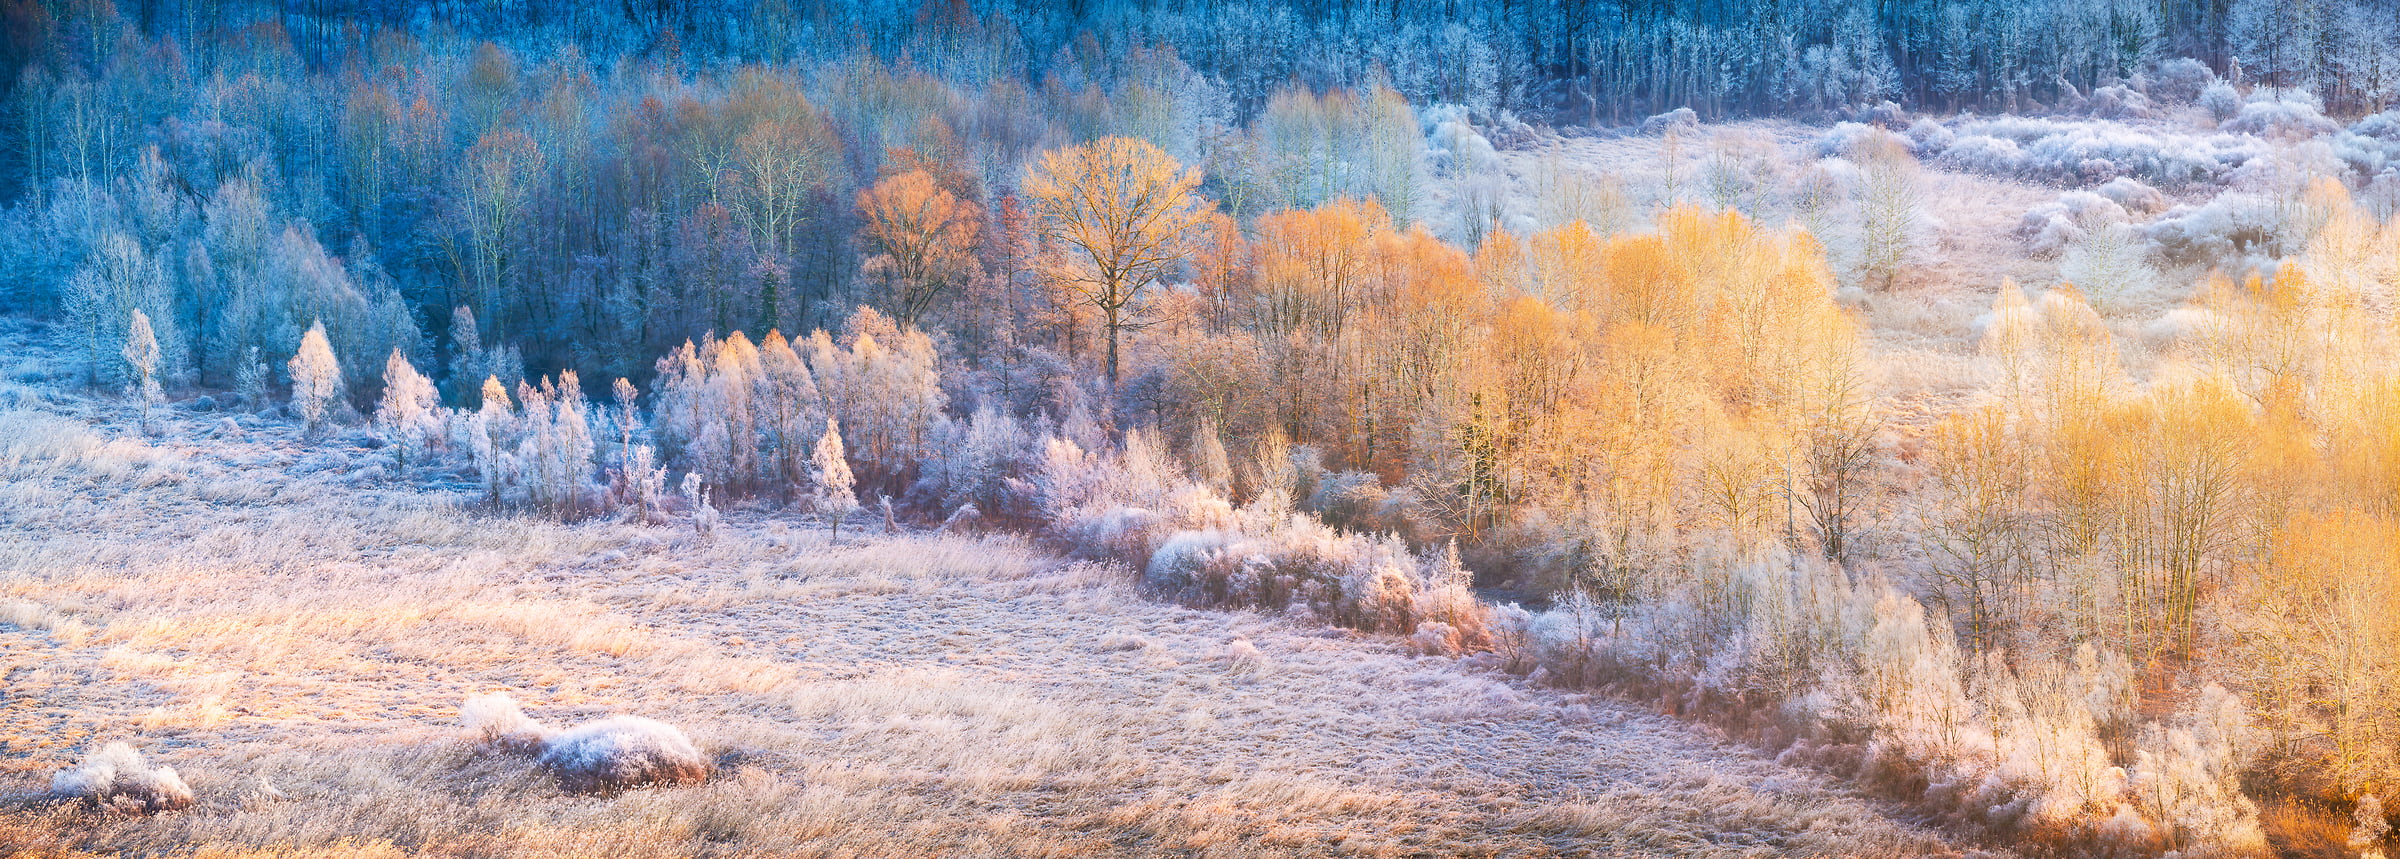 201 megapixels! A very high resolution, panorama VAST photo print of trees at sunrise in a sunny field with snow; landscape photograph created by Ennio Pozzetti in Airuno, Lombardia, Italy.